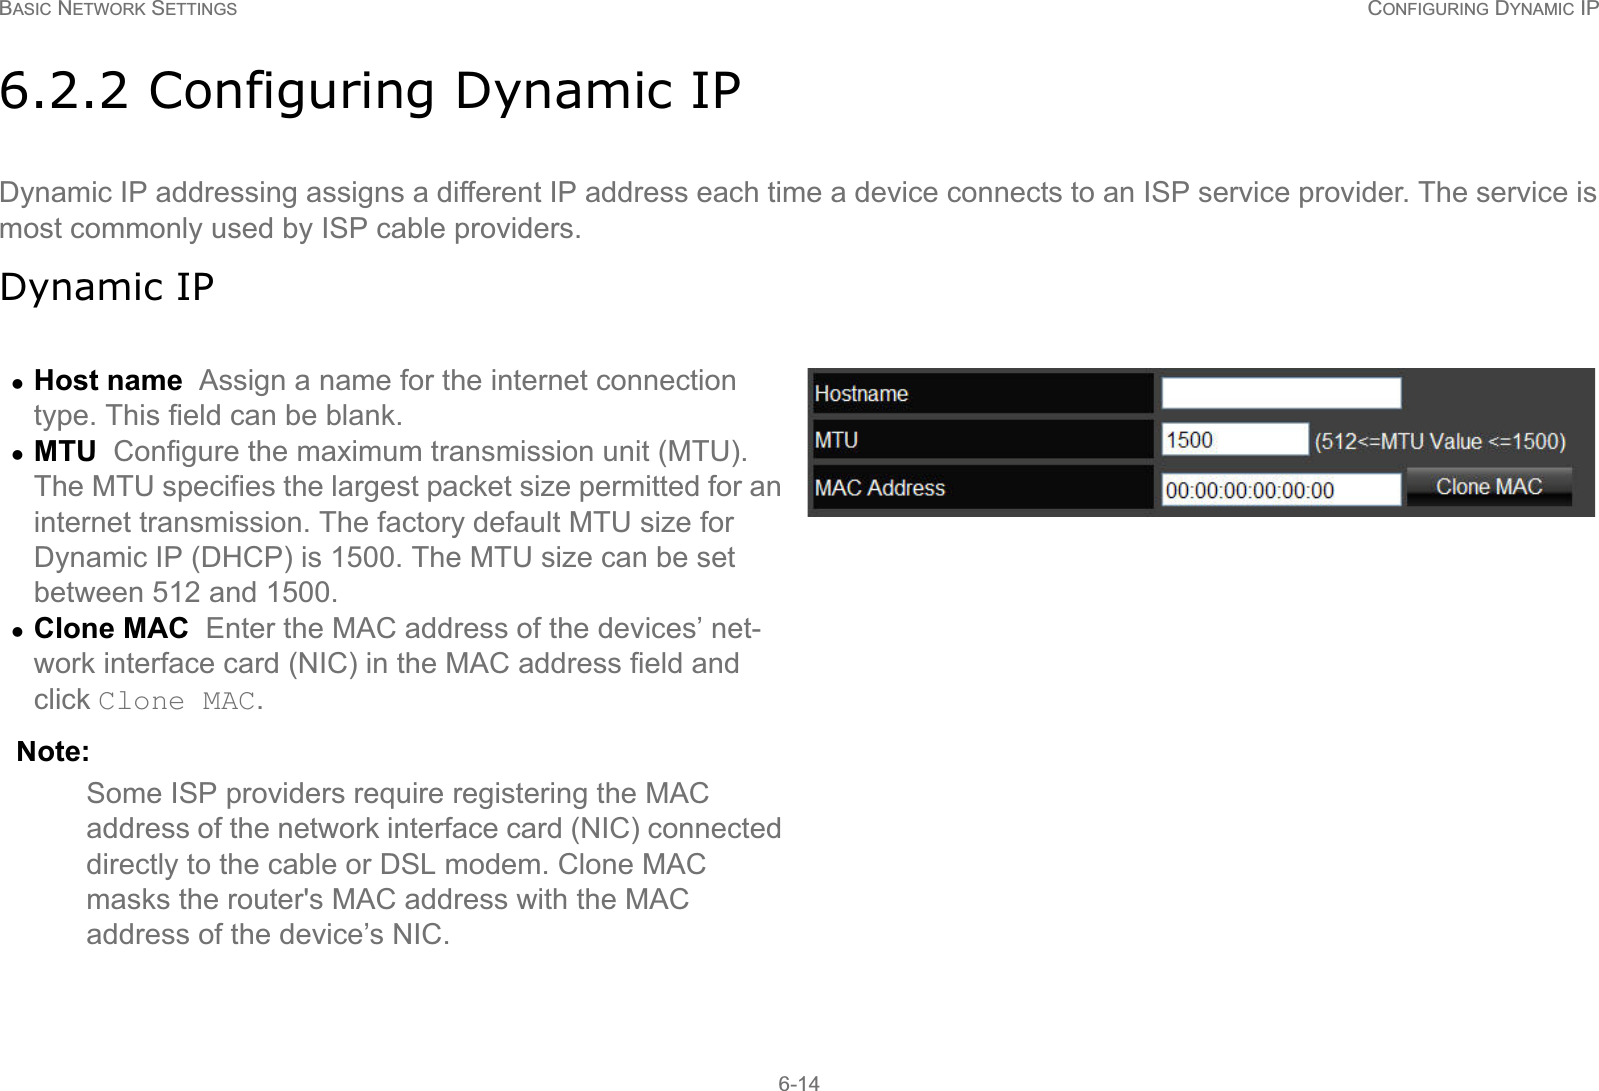 BASIC NETWORK SETTINGS CONFIGURING DYNAMIC IP6-146.2.2 Configuring Dynamic IPDynamic IP addressing assigns a different IP address each time a device connects to an ISP service provider. The service is most commonly used by ISP cable providers.Dynamic IPzHost name  Assign a name for the internet connection type. This field can be blank.zMTU  Configure the maximum transmission unit (MTU). The MTU specifies the largest packet size permitted for an internet transmission. The factory default MTU size for Dynamic IP (DHCP) is 1500. The MTU size can be set between 512 and 1500.zClone MAC  Enter the MAC address of the devices’ net-work interface card (NIC) in the MAC address field and click Clone MAC. Note:Some ISP providers require registering the MAC address of the network interface card (NIC) connected directly to the cable or DSL modem. Clone MAC masks the router&apos;s MAC address with the MAC address of the device’s NIC.